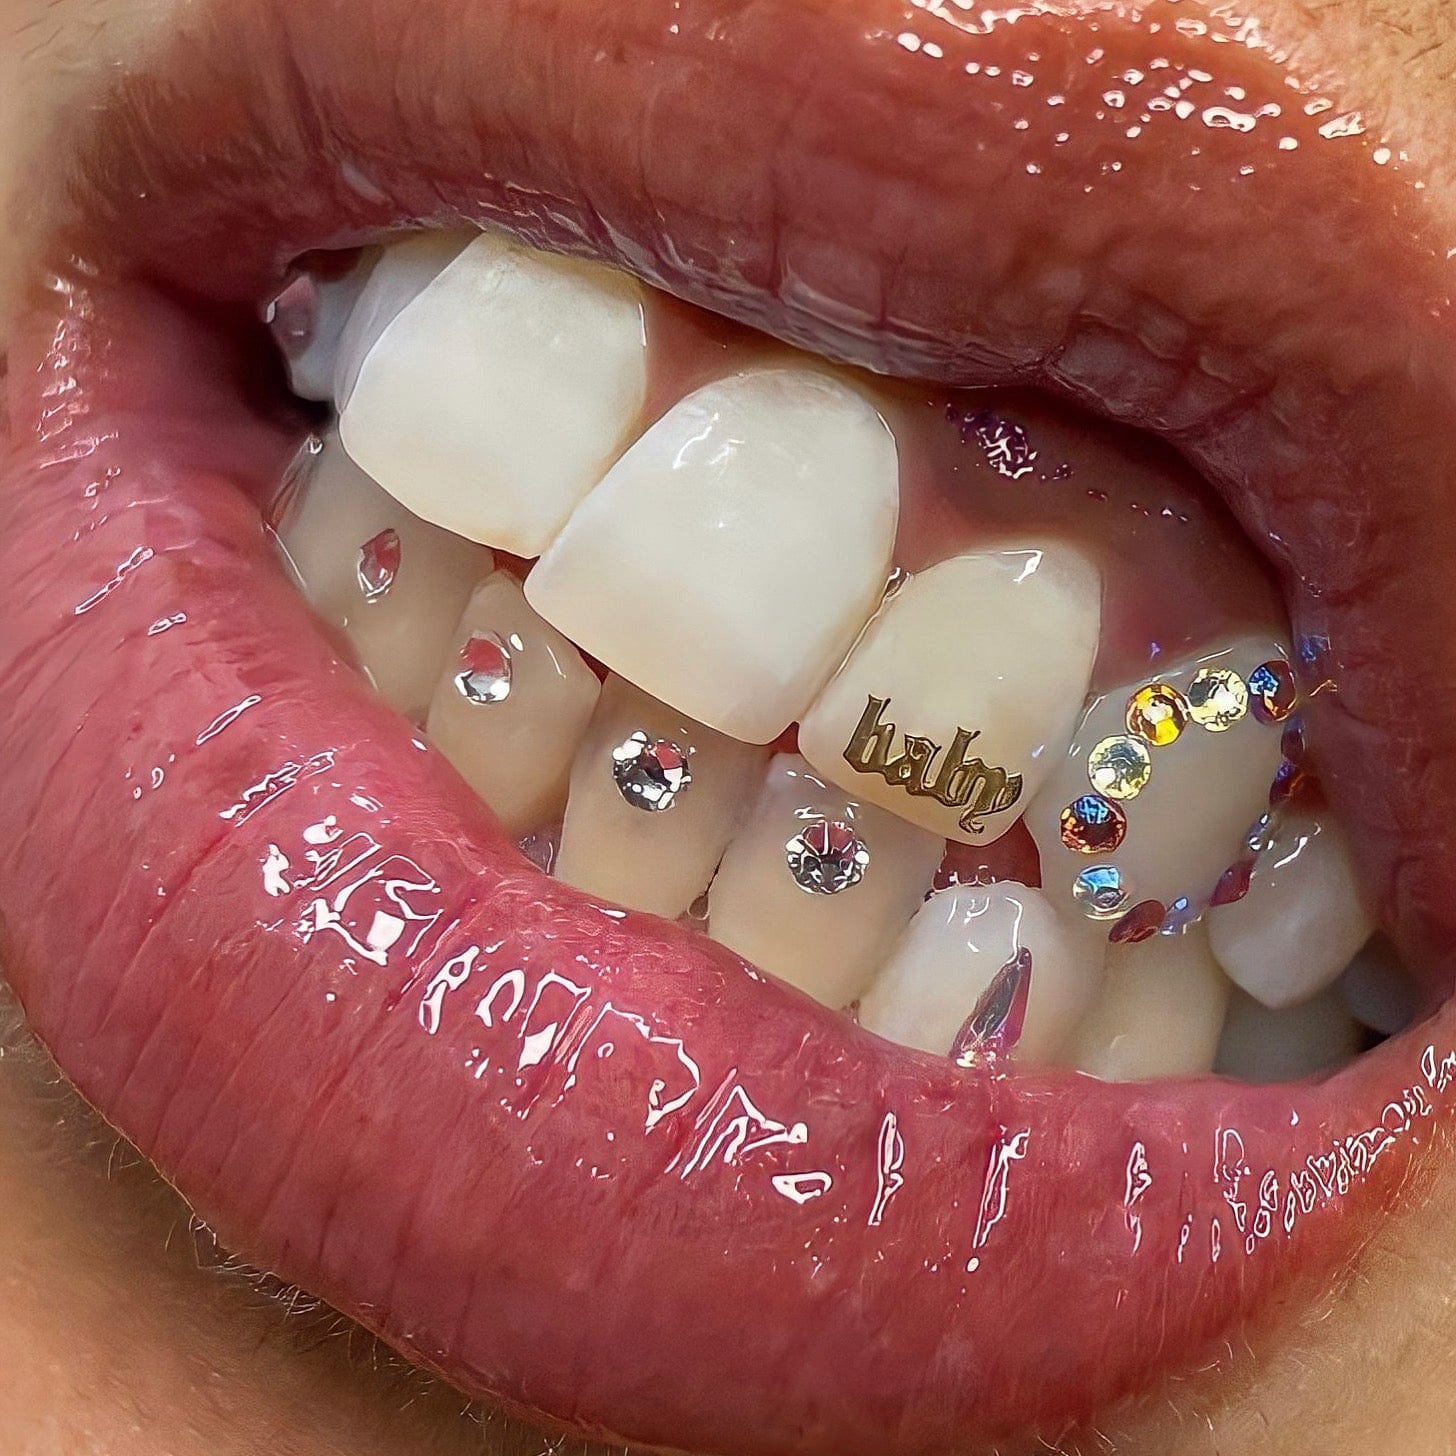 colorful crystals swarovski Tooth gems, gold baby word teeth jewelry